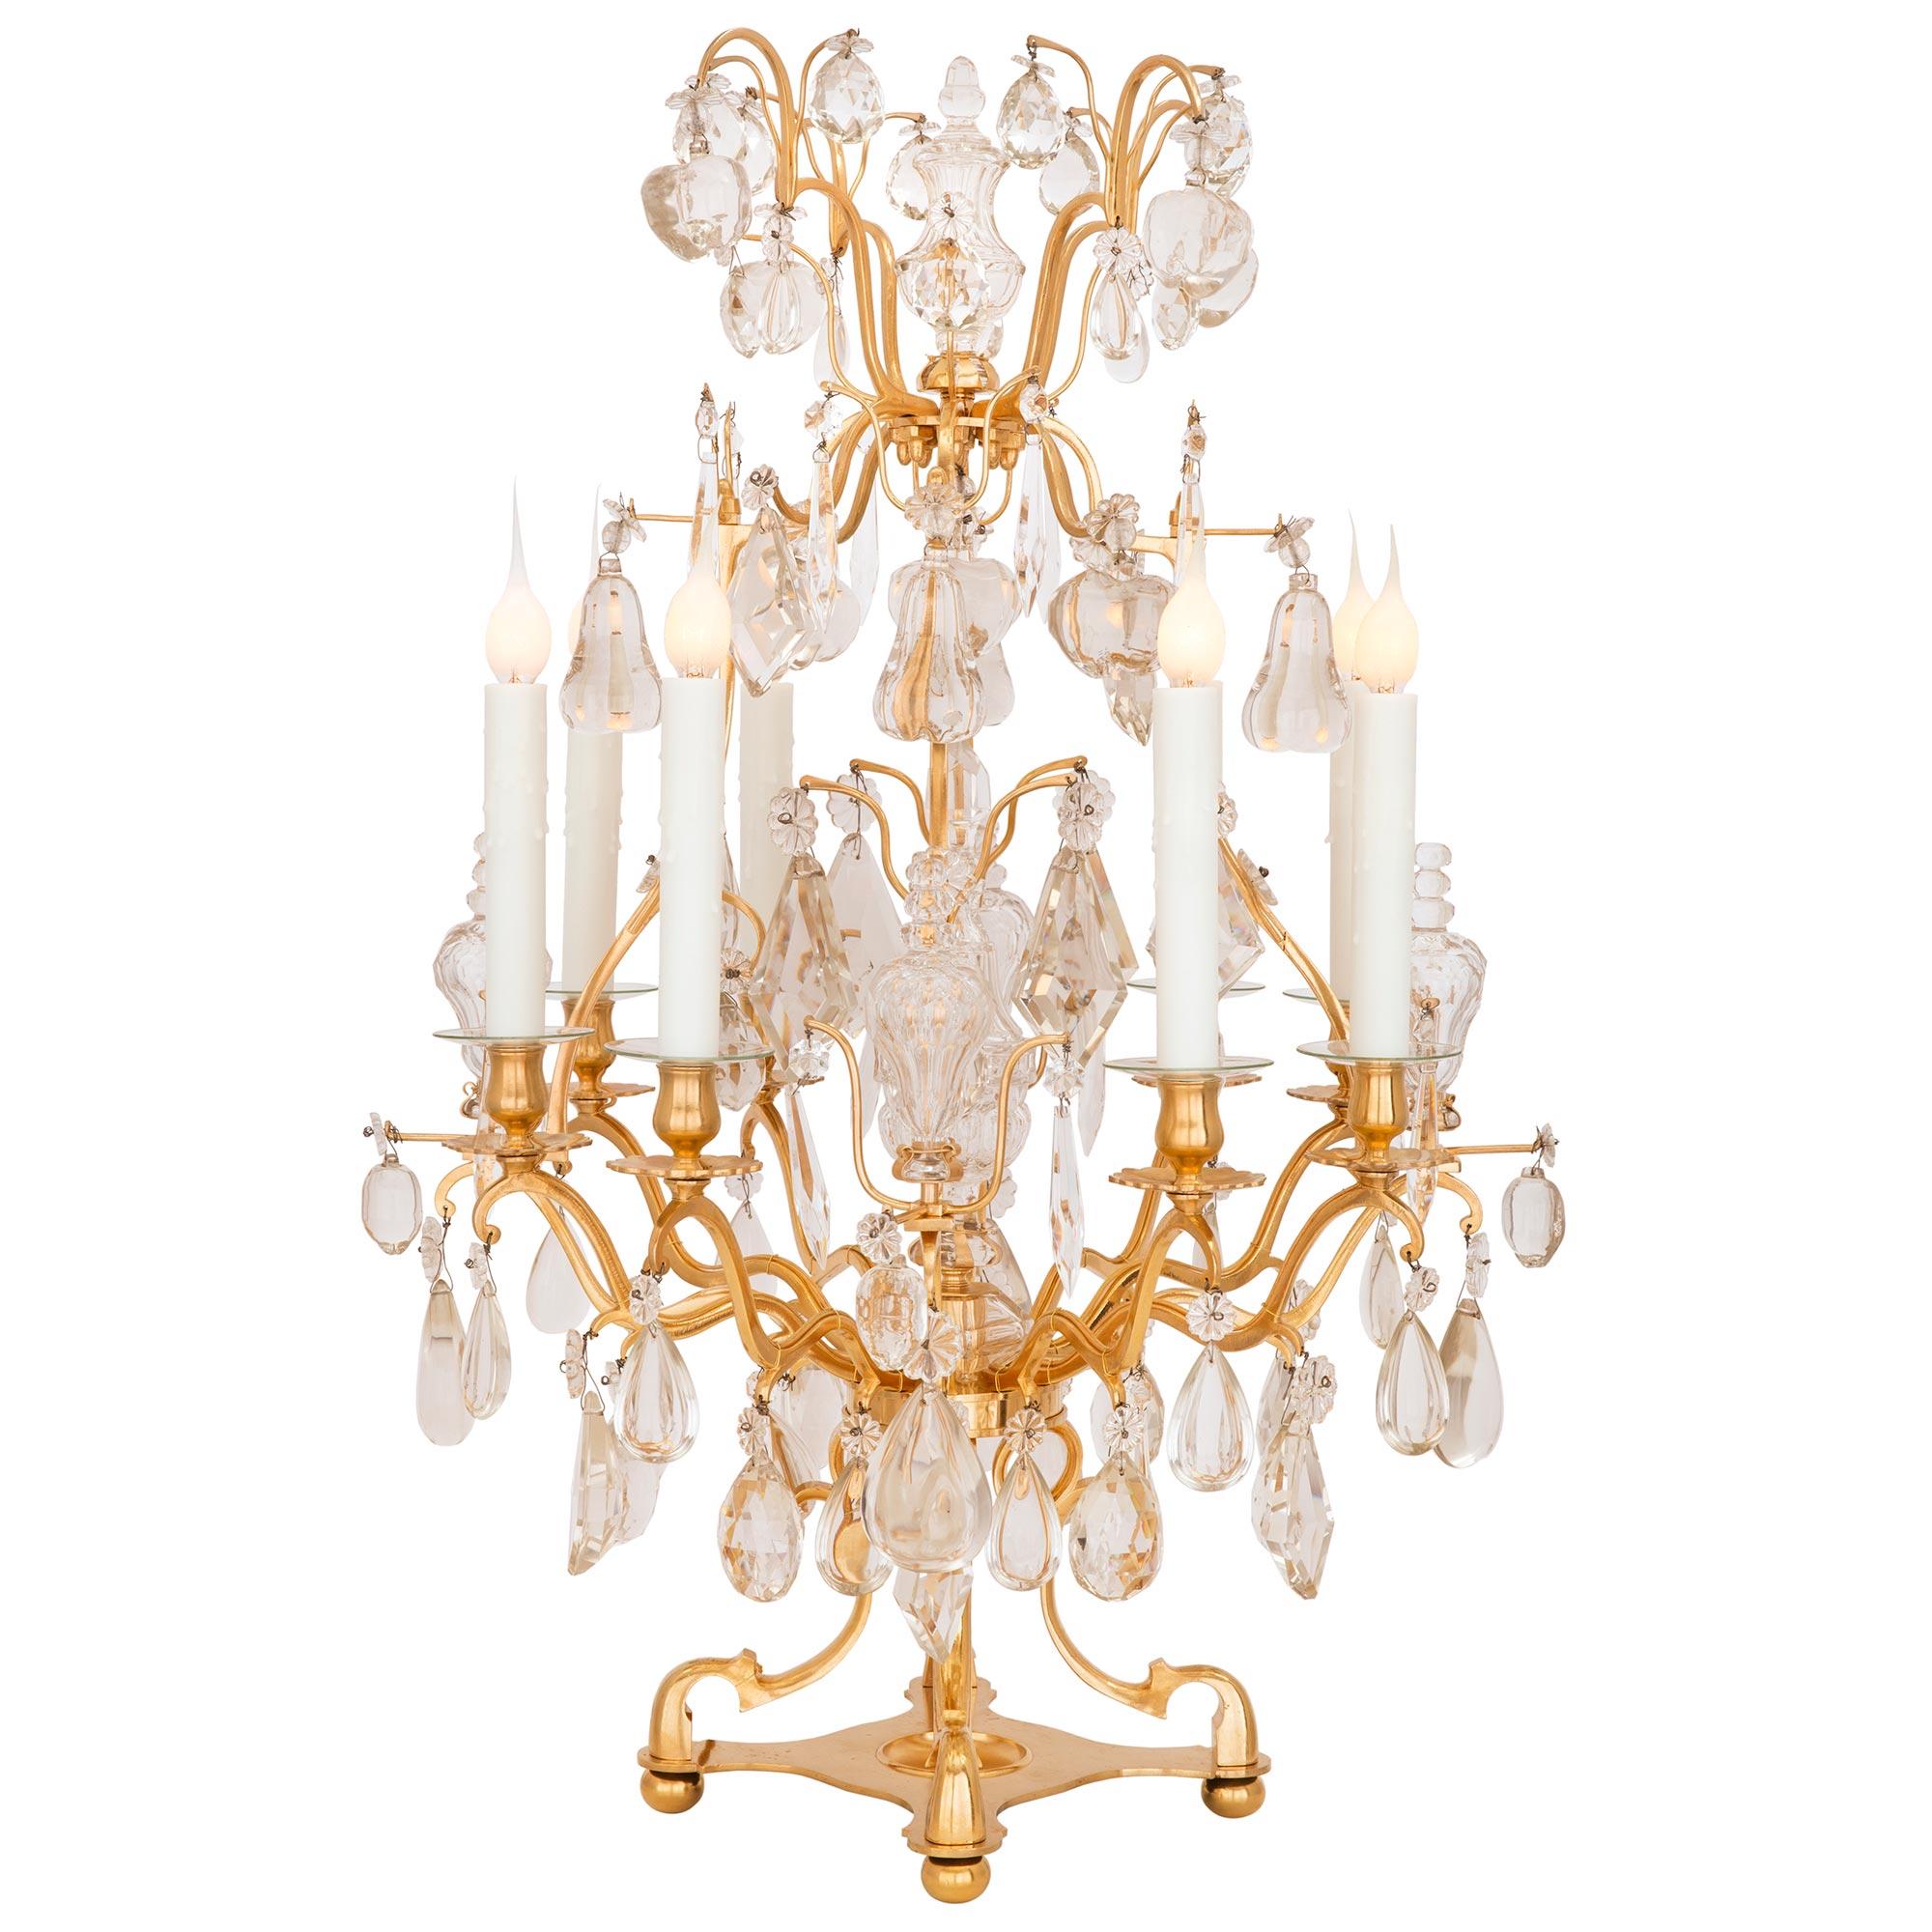 A stunning pair of French 19th century Louis XVI st. Belle Époque period ormolu and Baccarat crystal girandole lamps. Each eight arm lamp is raised by a unique and most decorative ormolu base with ball feet and fine beautifully scrolled supports